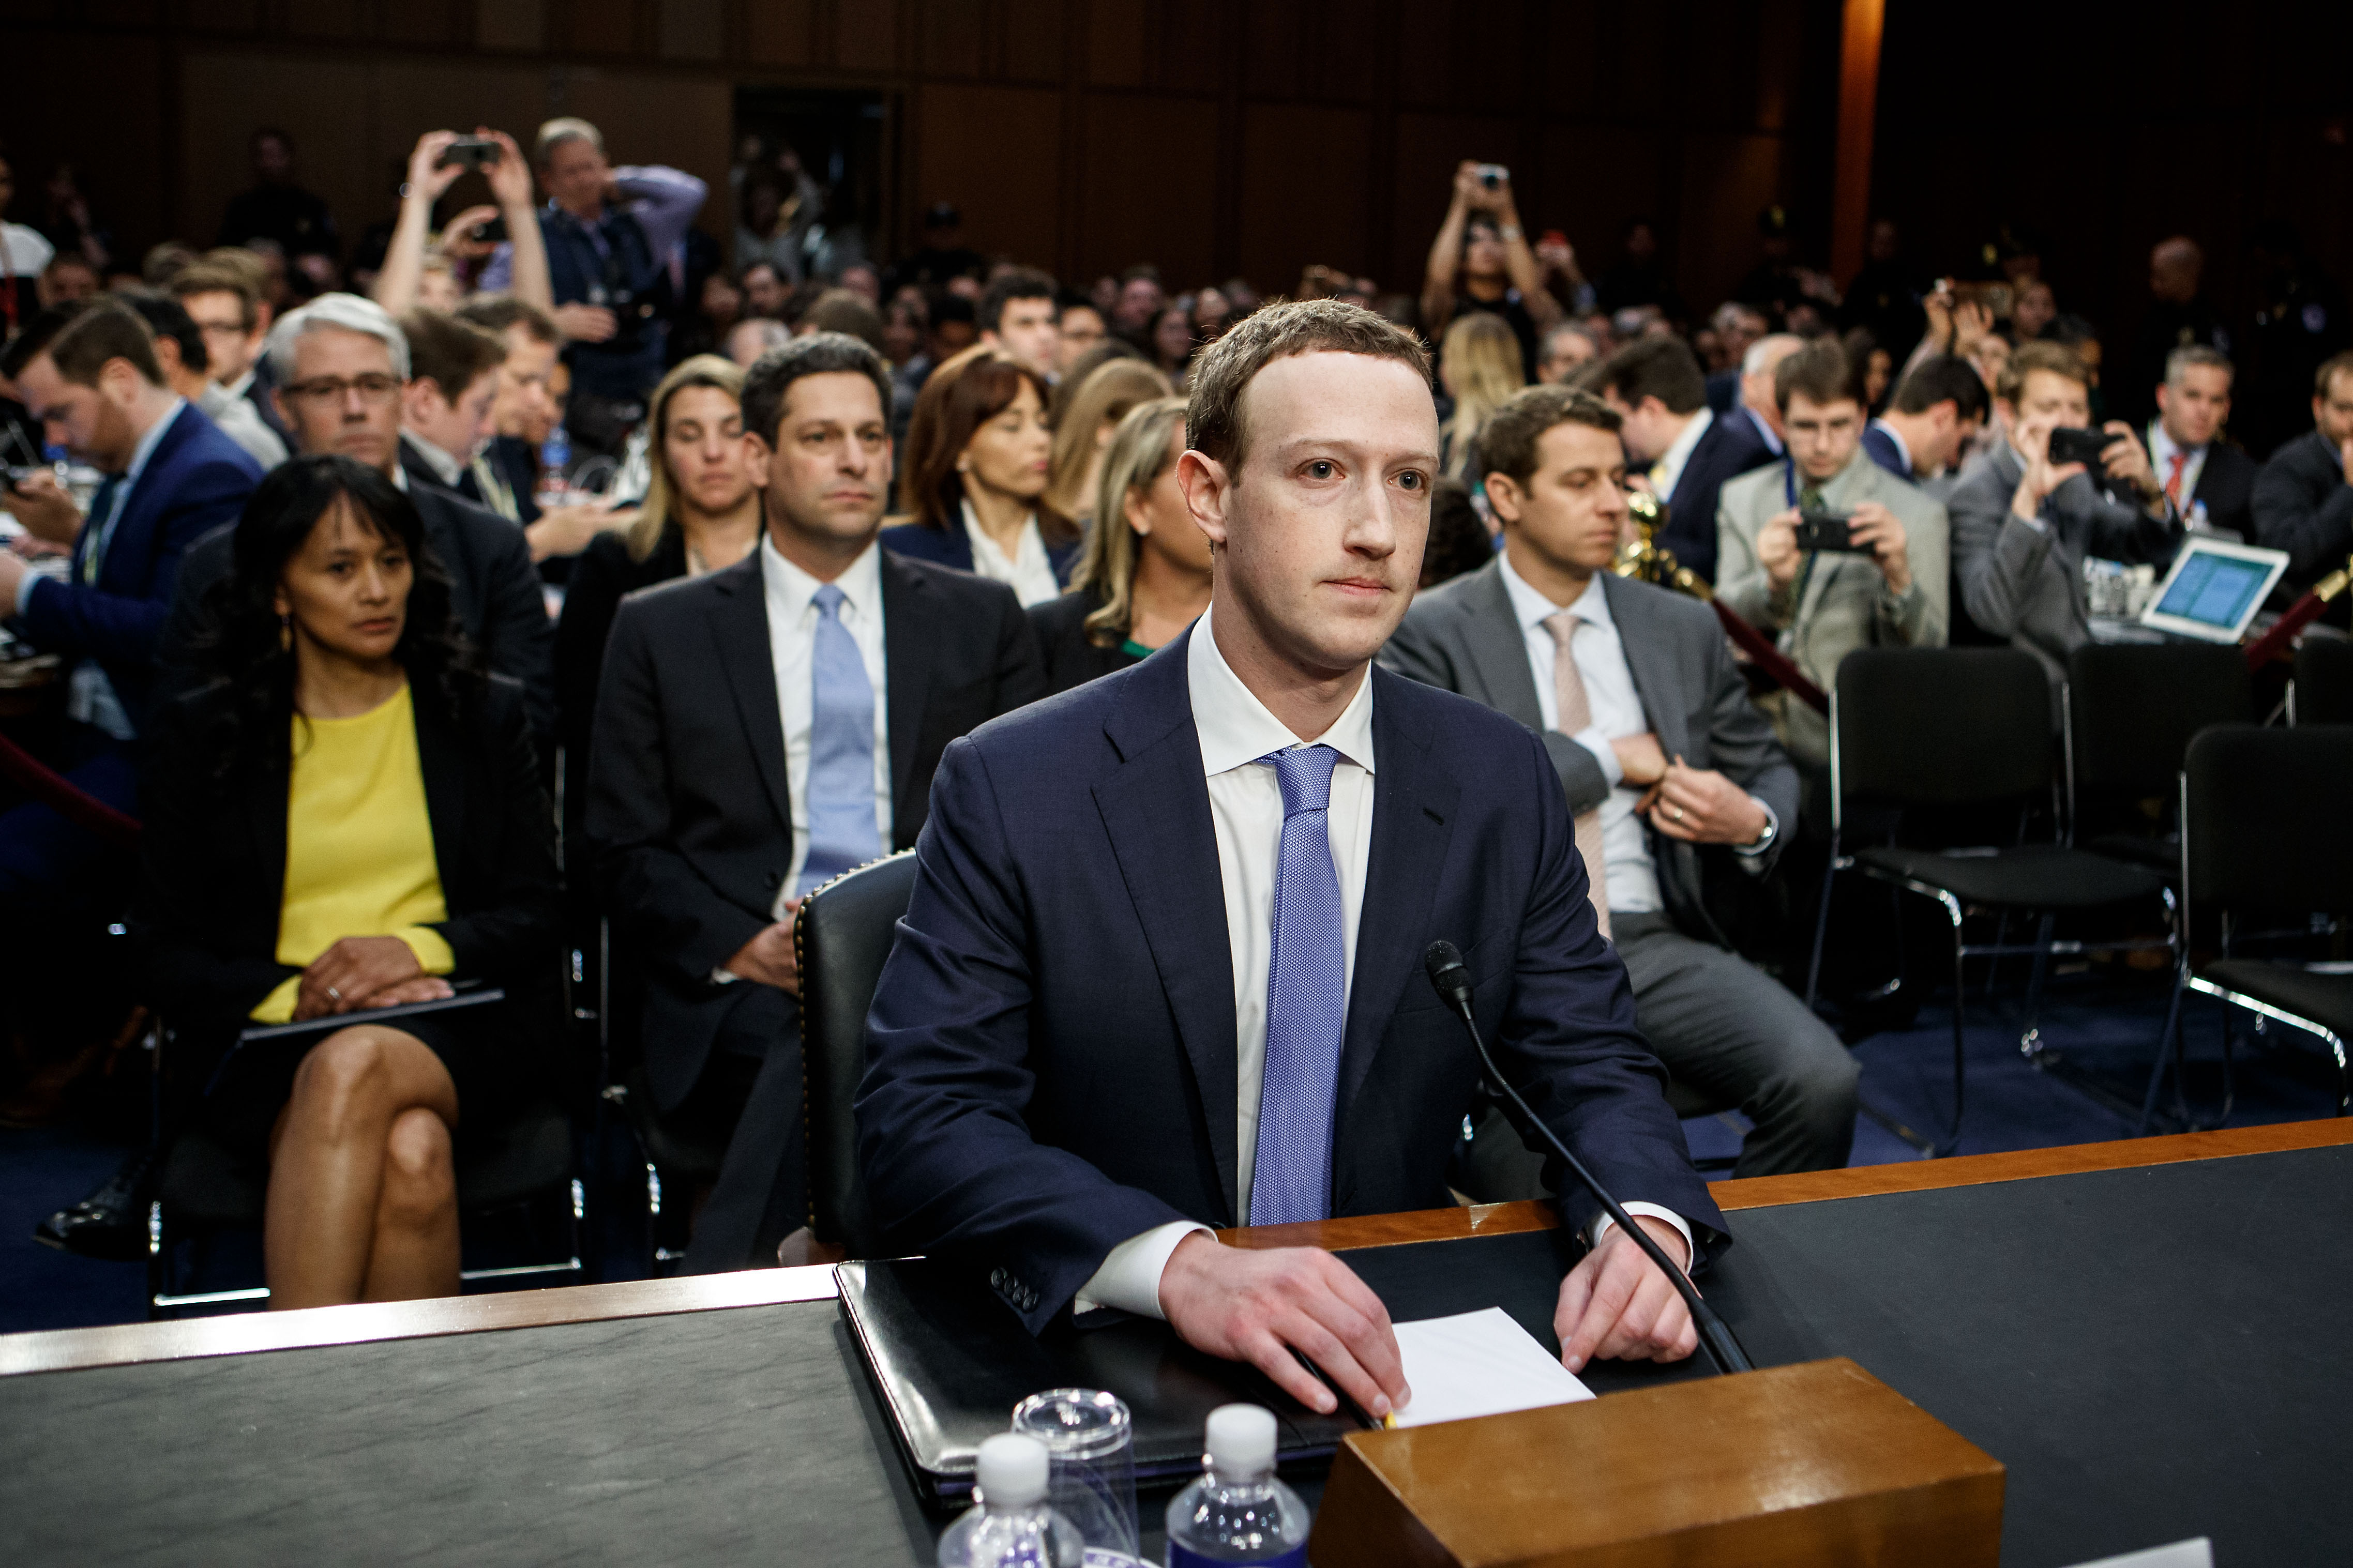 Facebook CEO Mark Zuckerberg sitting at a desk and wearing a suit and tie for his testimony before Congress in 2018. The room behind him is packed with seated people.